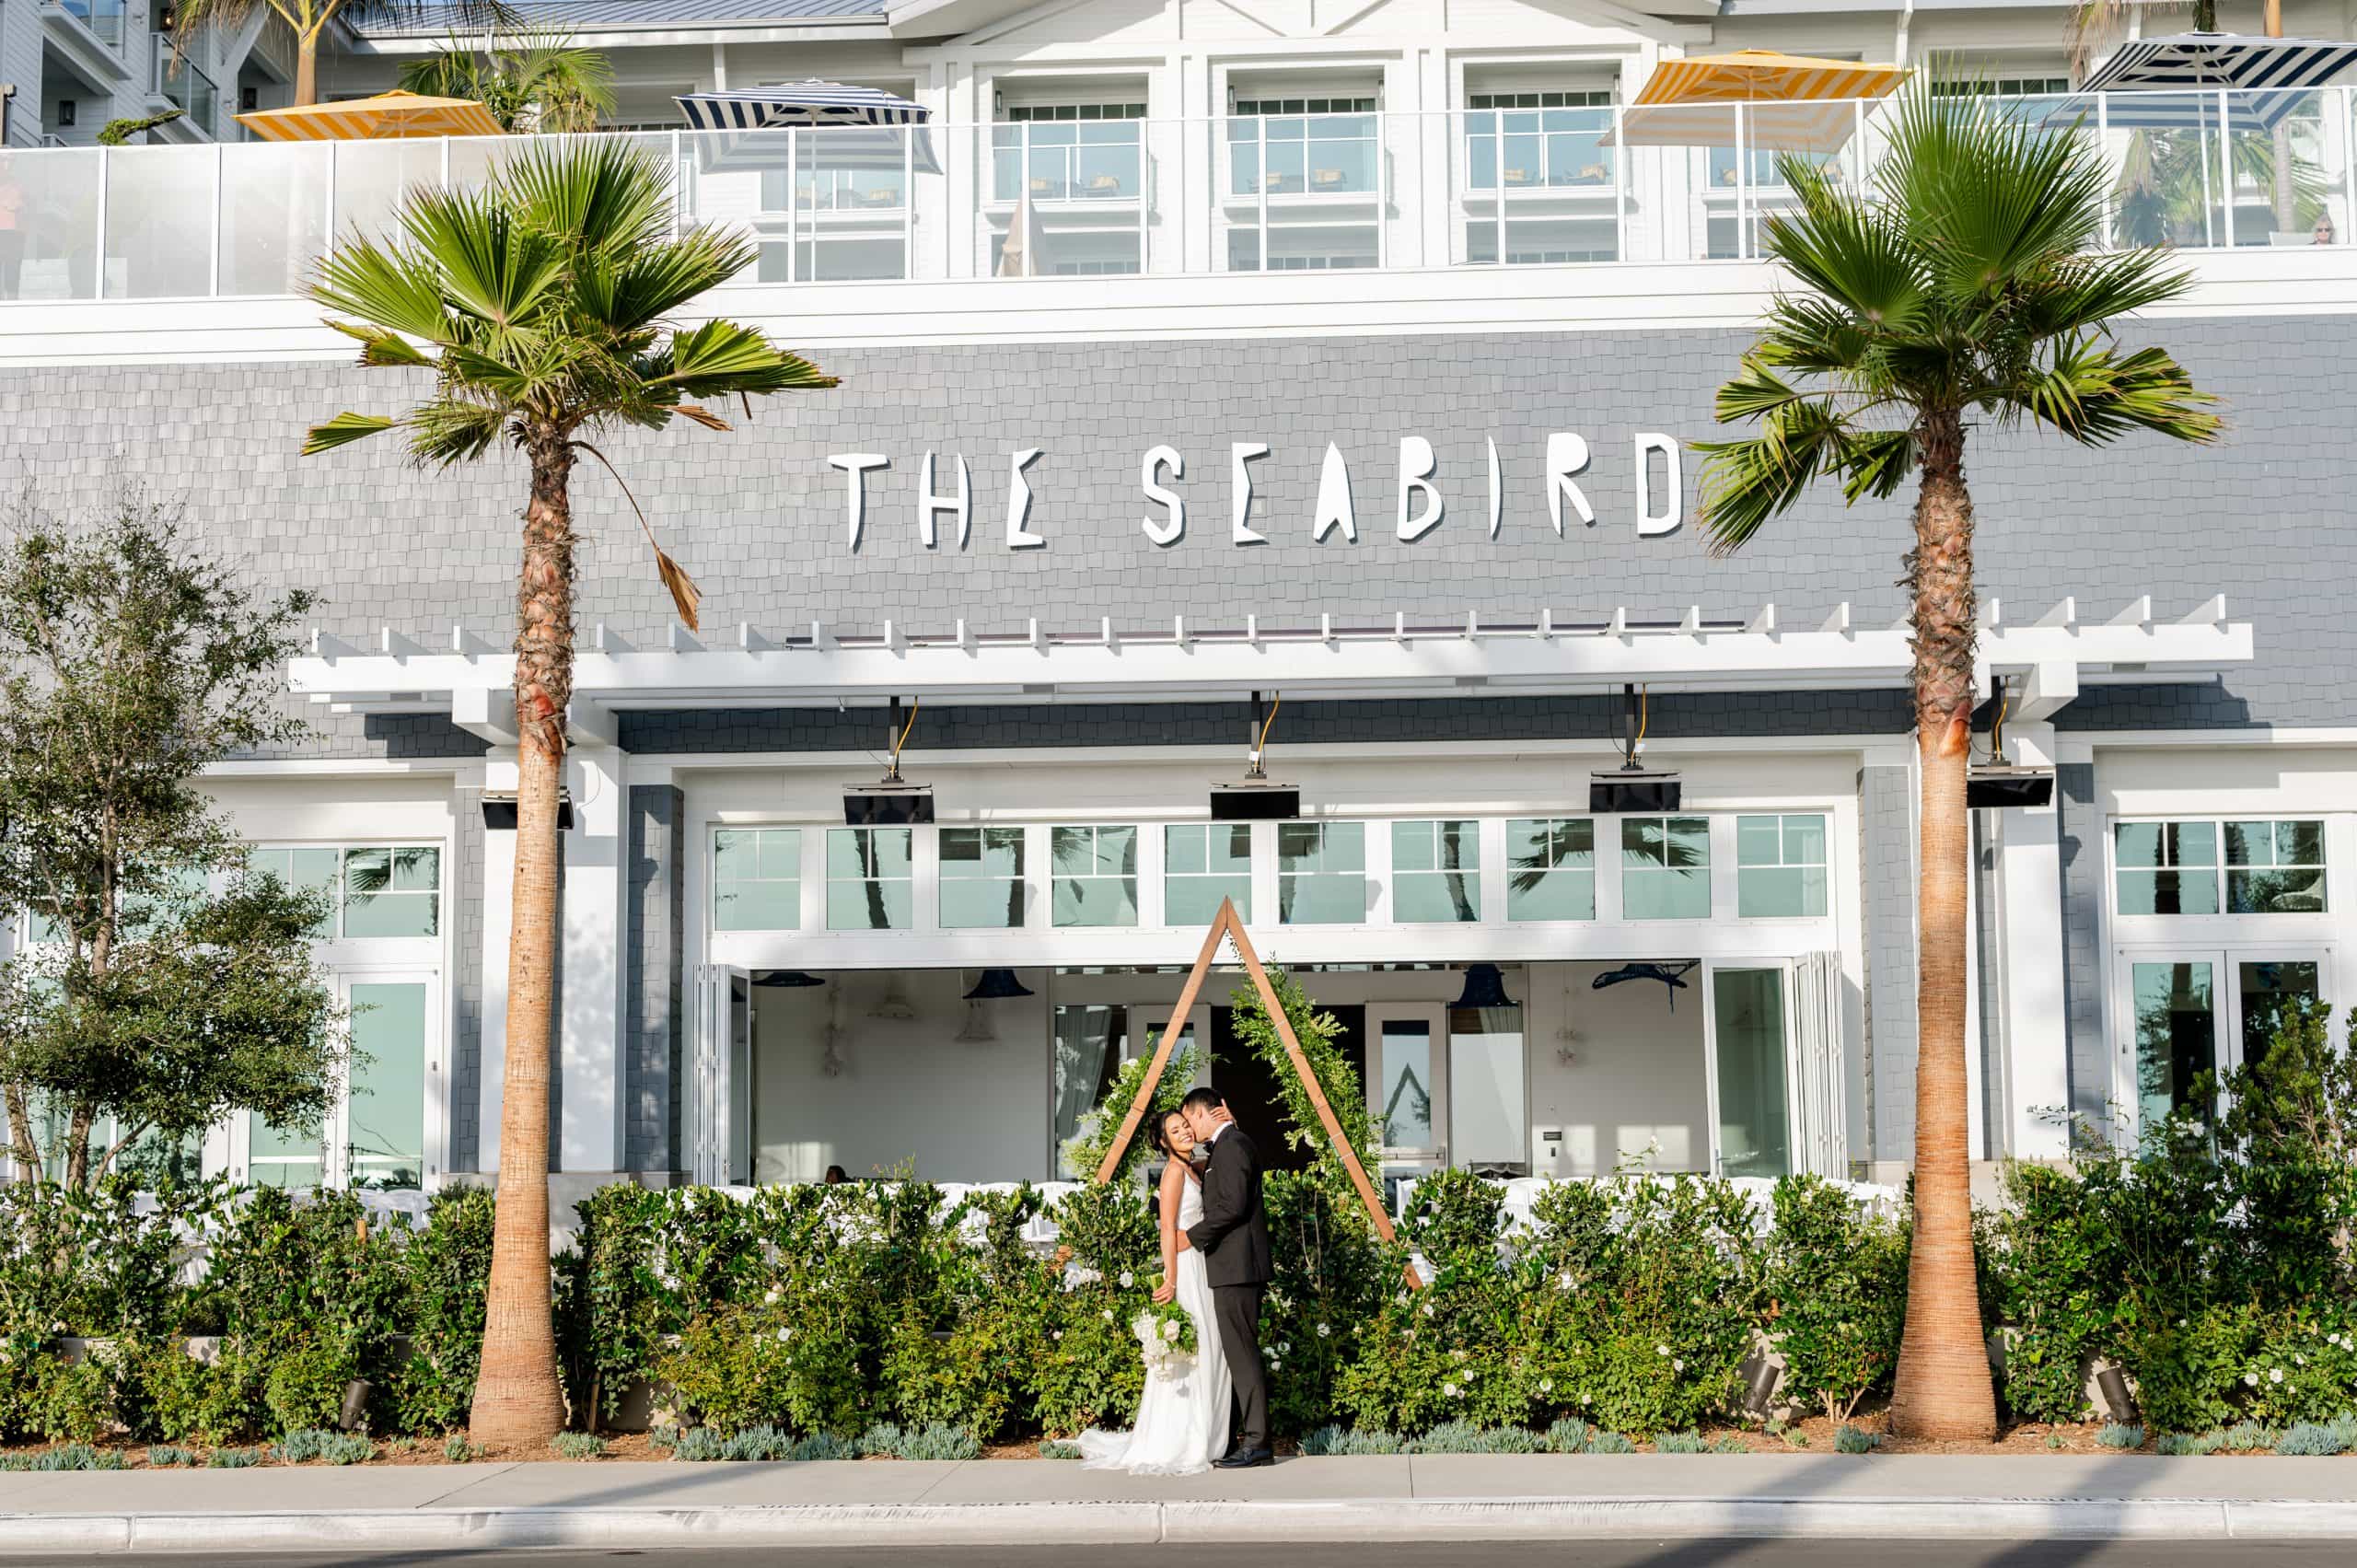 A married couple kissing in front of the Seabird facade